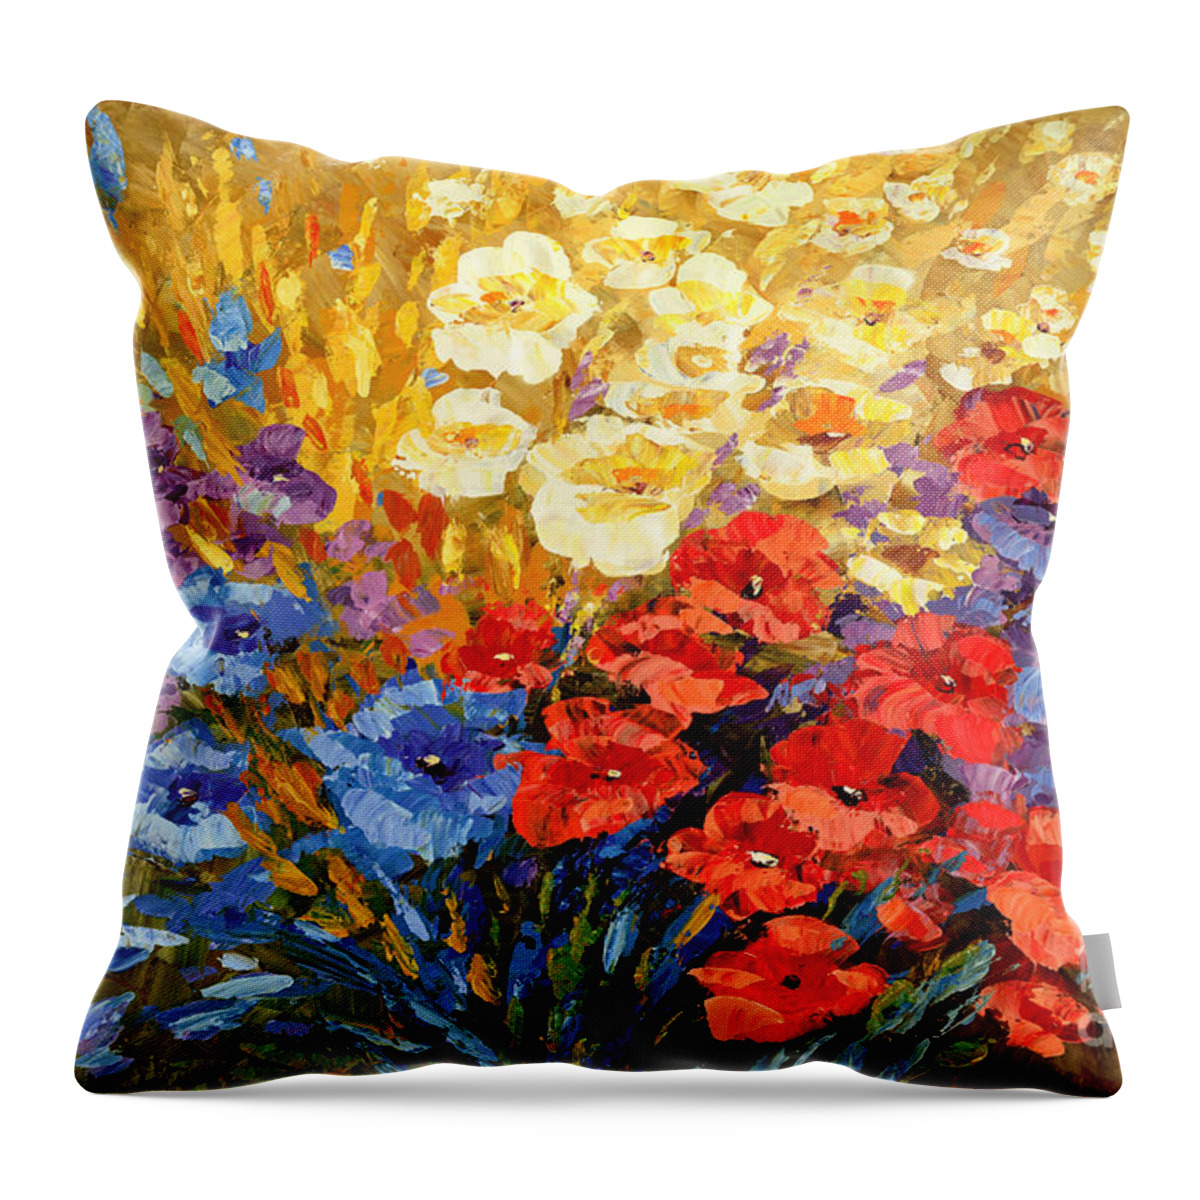 Floral Throw Pillow featuring the painting Curiously Creative by Tatiana Iliina